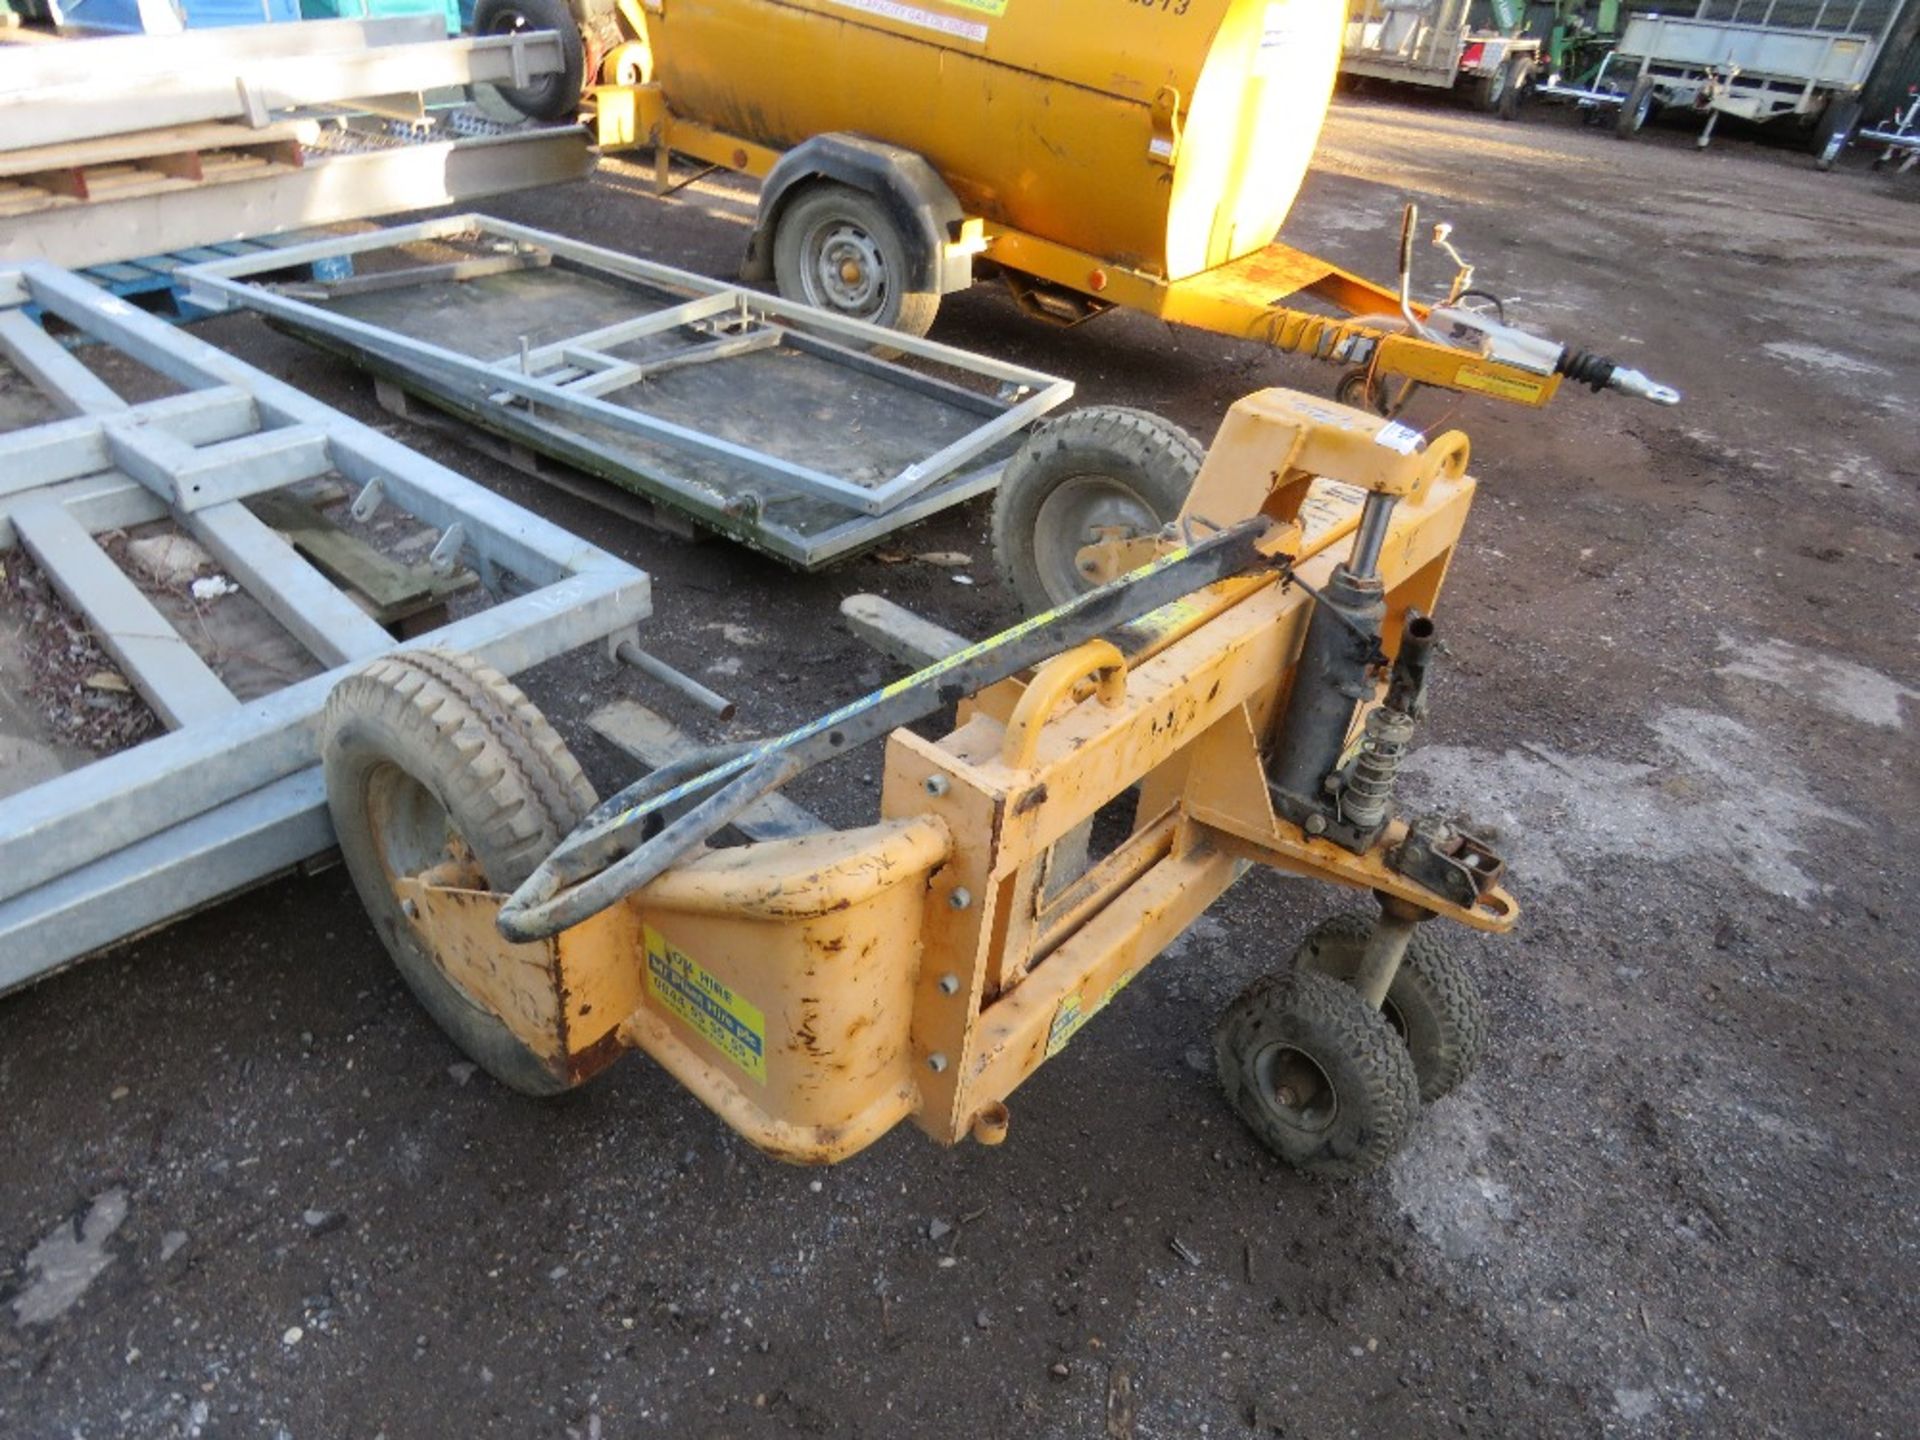 ROUGH TERRAIN PALLET TRUCK. WHEN TESTED WAS SEEN TO LIFT AND LOWER, HANDLE NEEDS REPAIR AS SHOWN. - Image 3 of 3